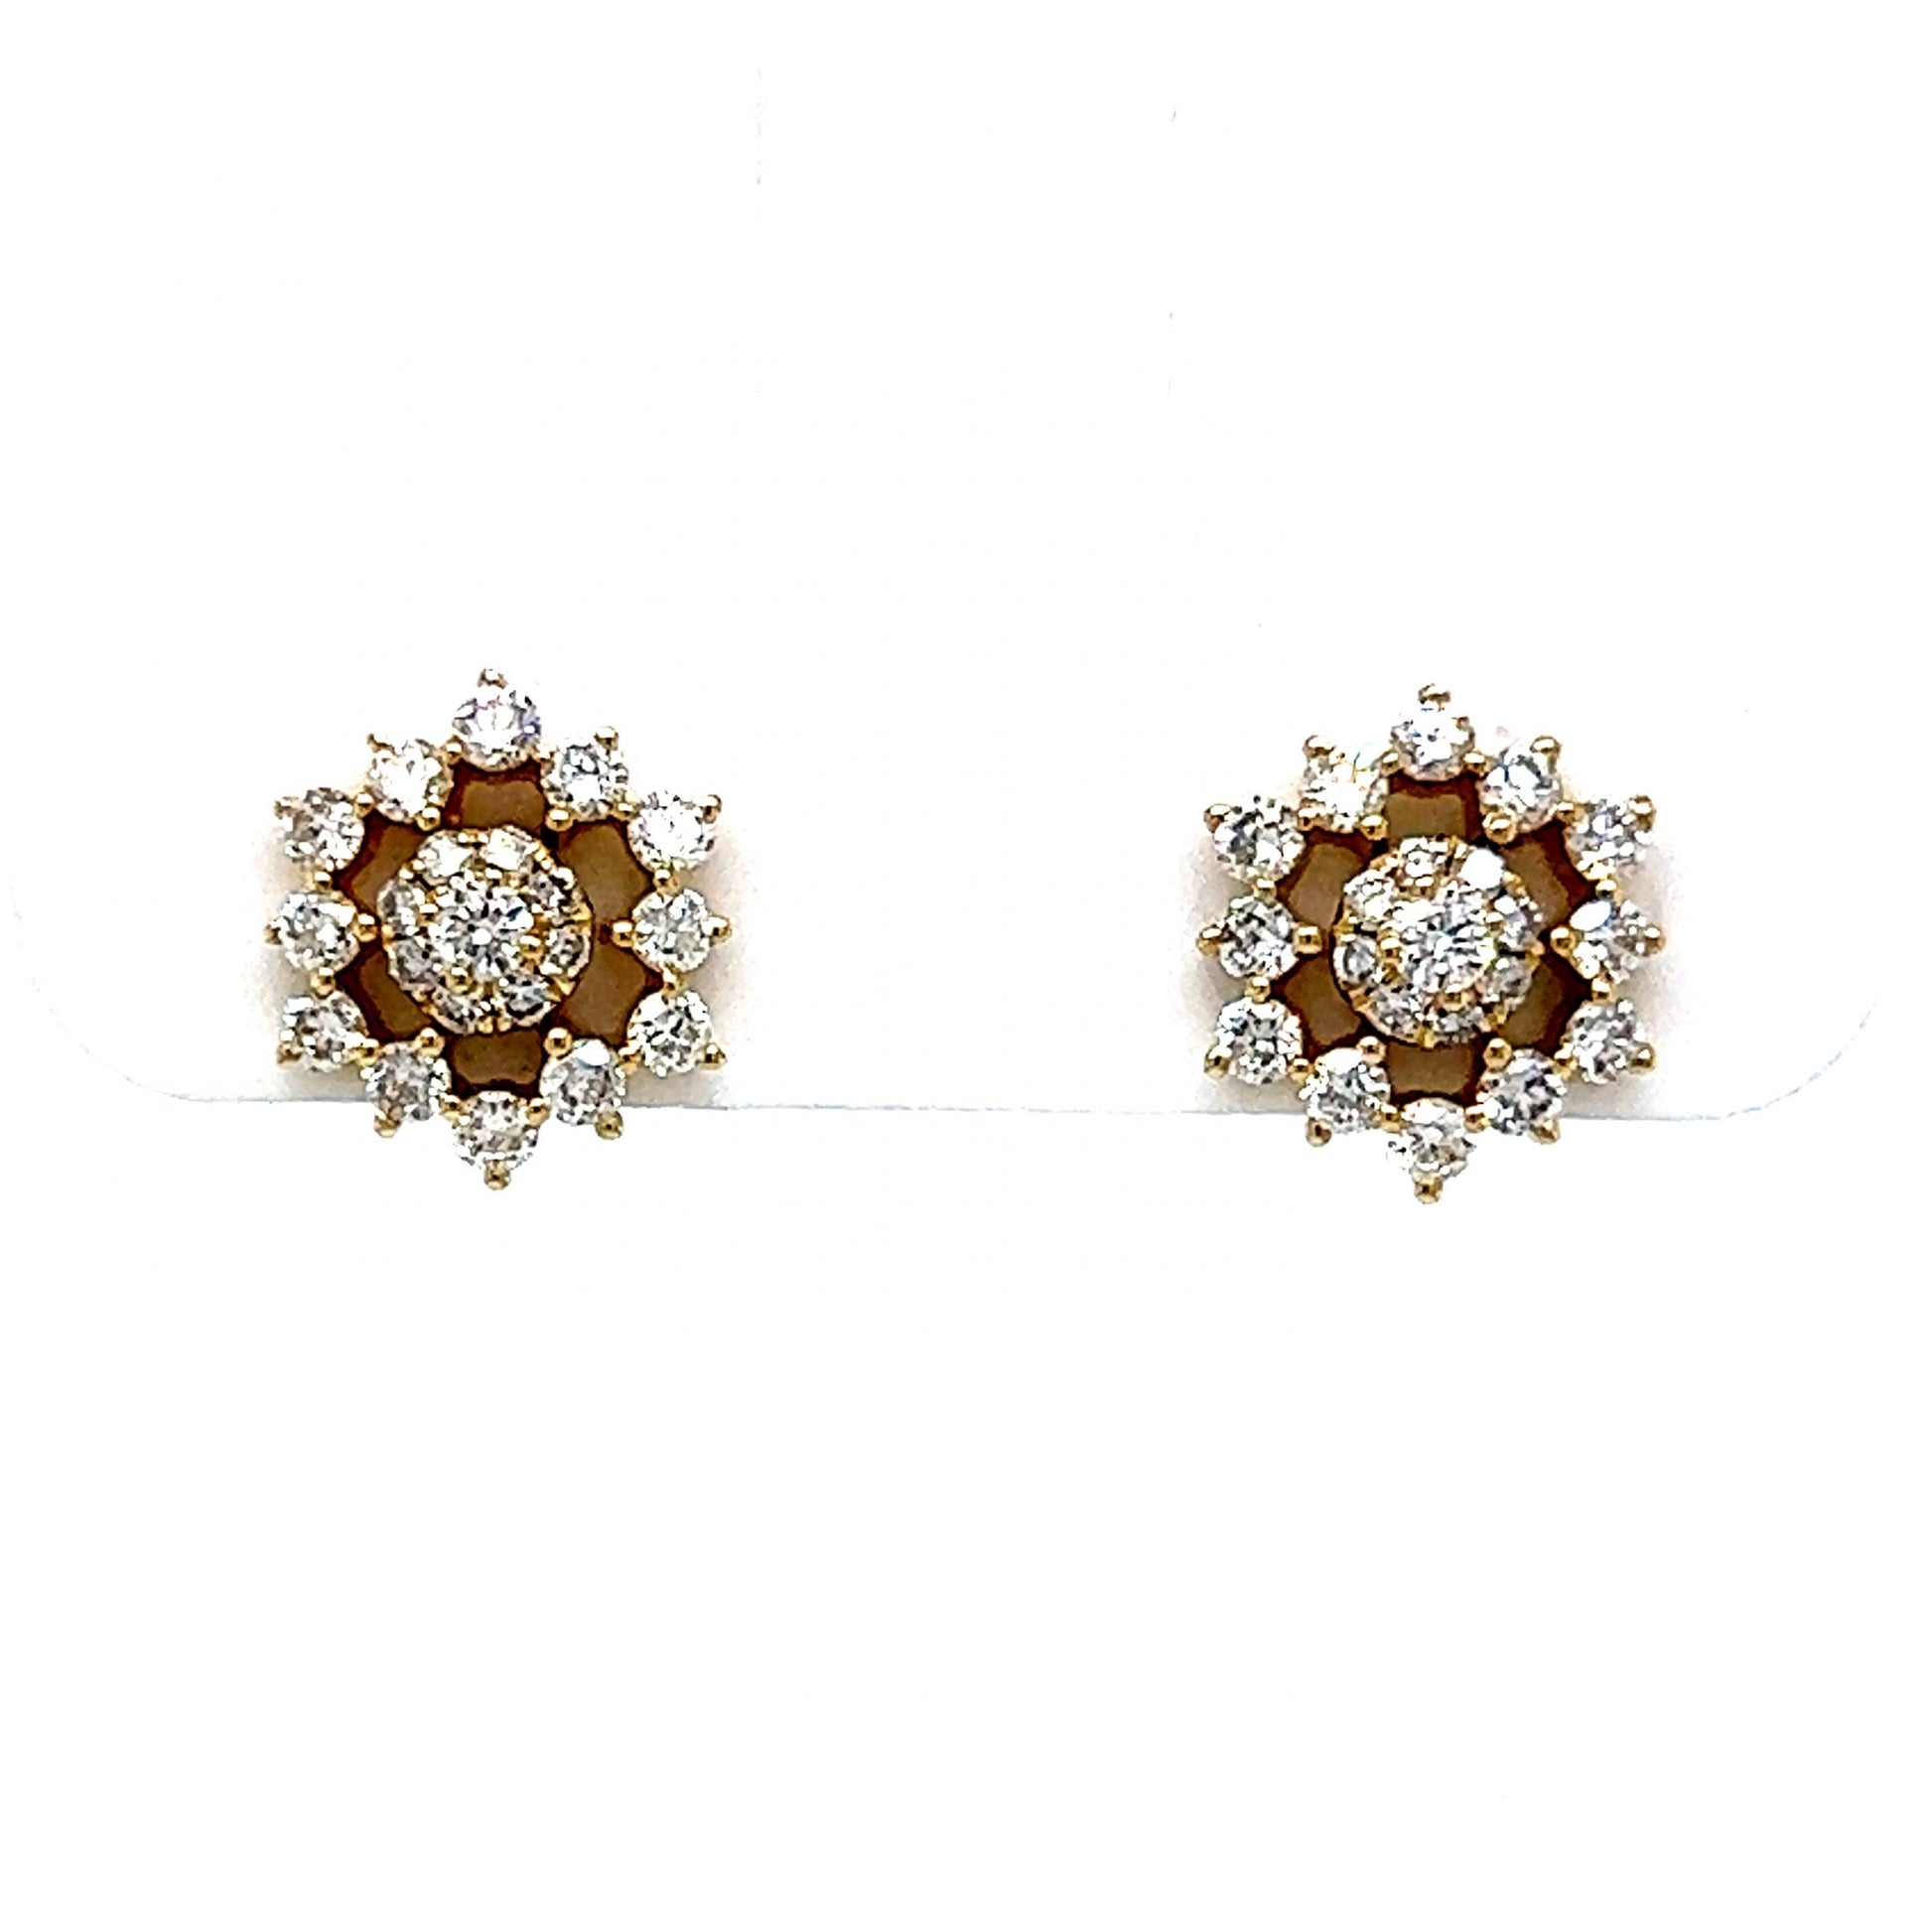 14K YELLOW GOLD TWO TONE GOLD SMALL DIAMOND FLOWER STUDS EARRINGS 3 GRAMS